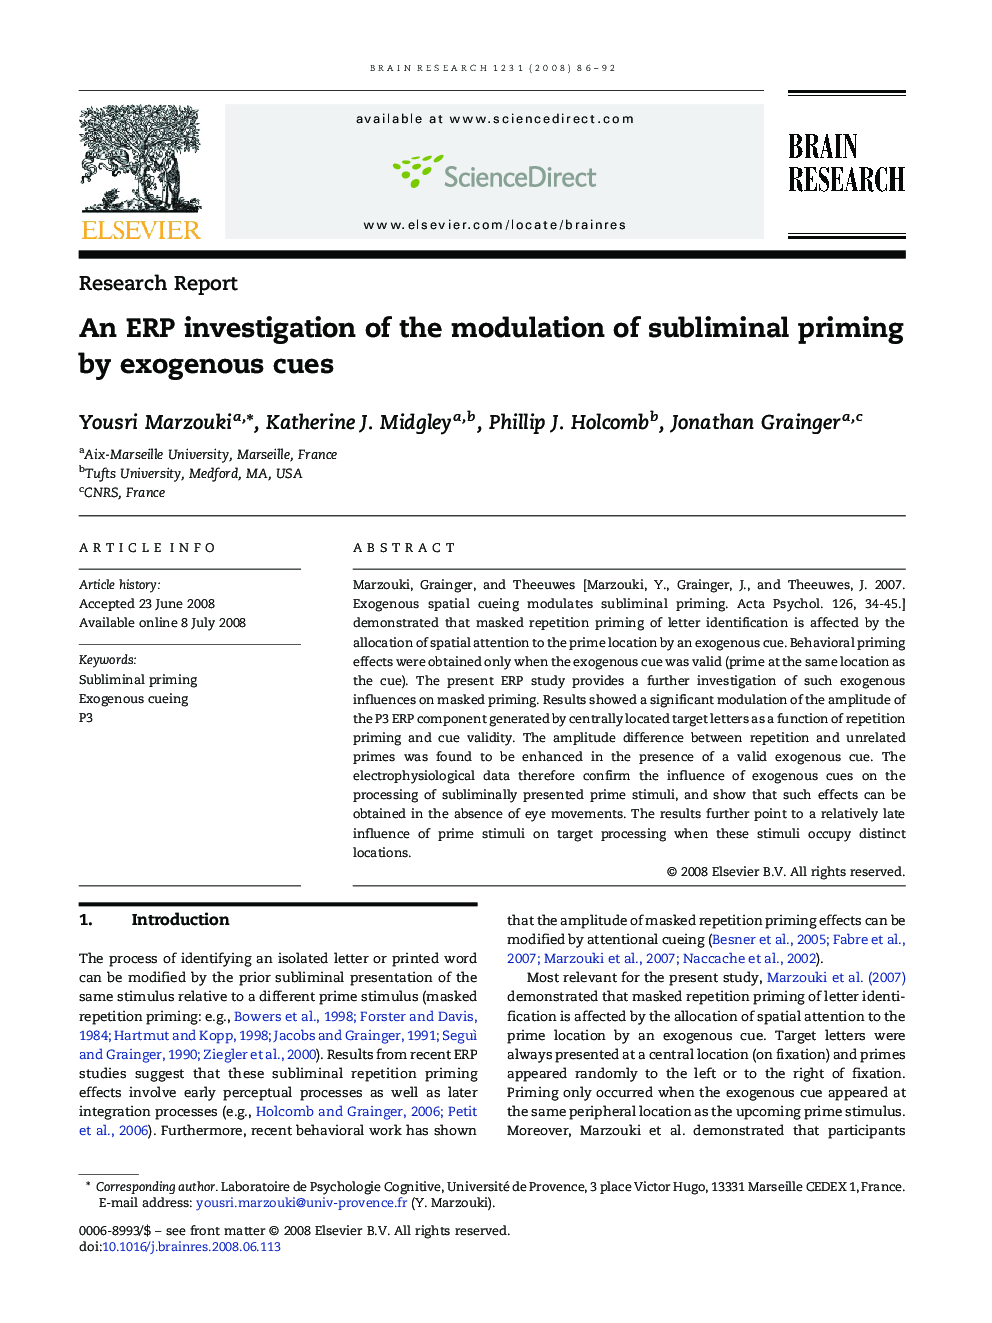 An ERP investigation of the modulation of subliminal priming by exogenous cues